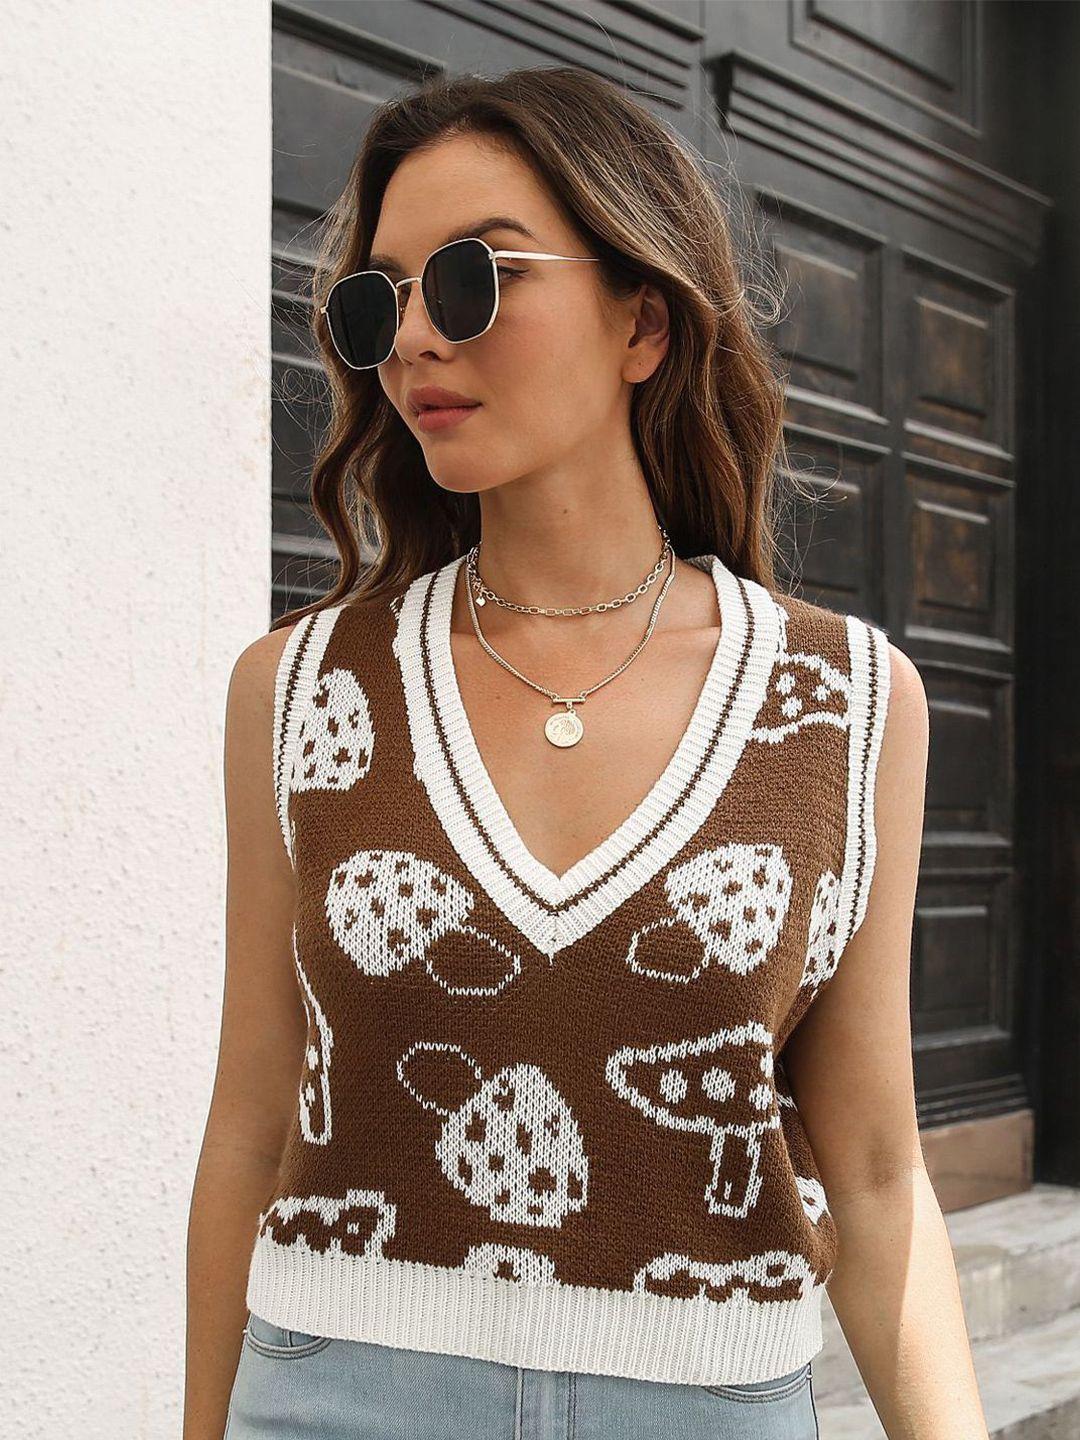 stylecast women brown & white printed sweater vest